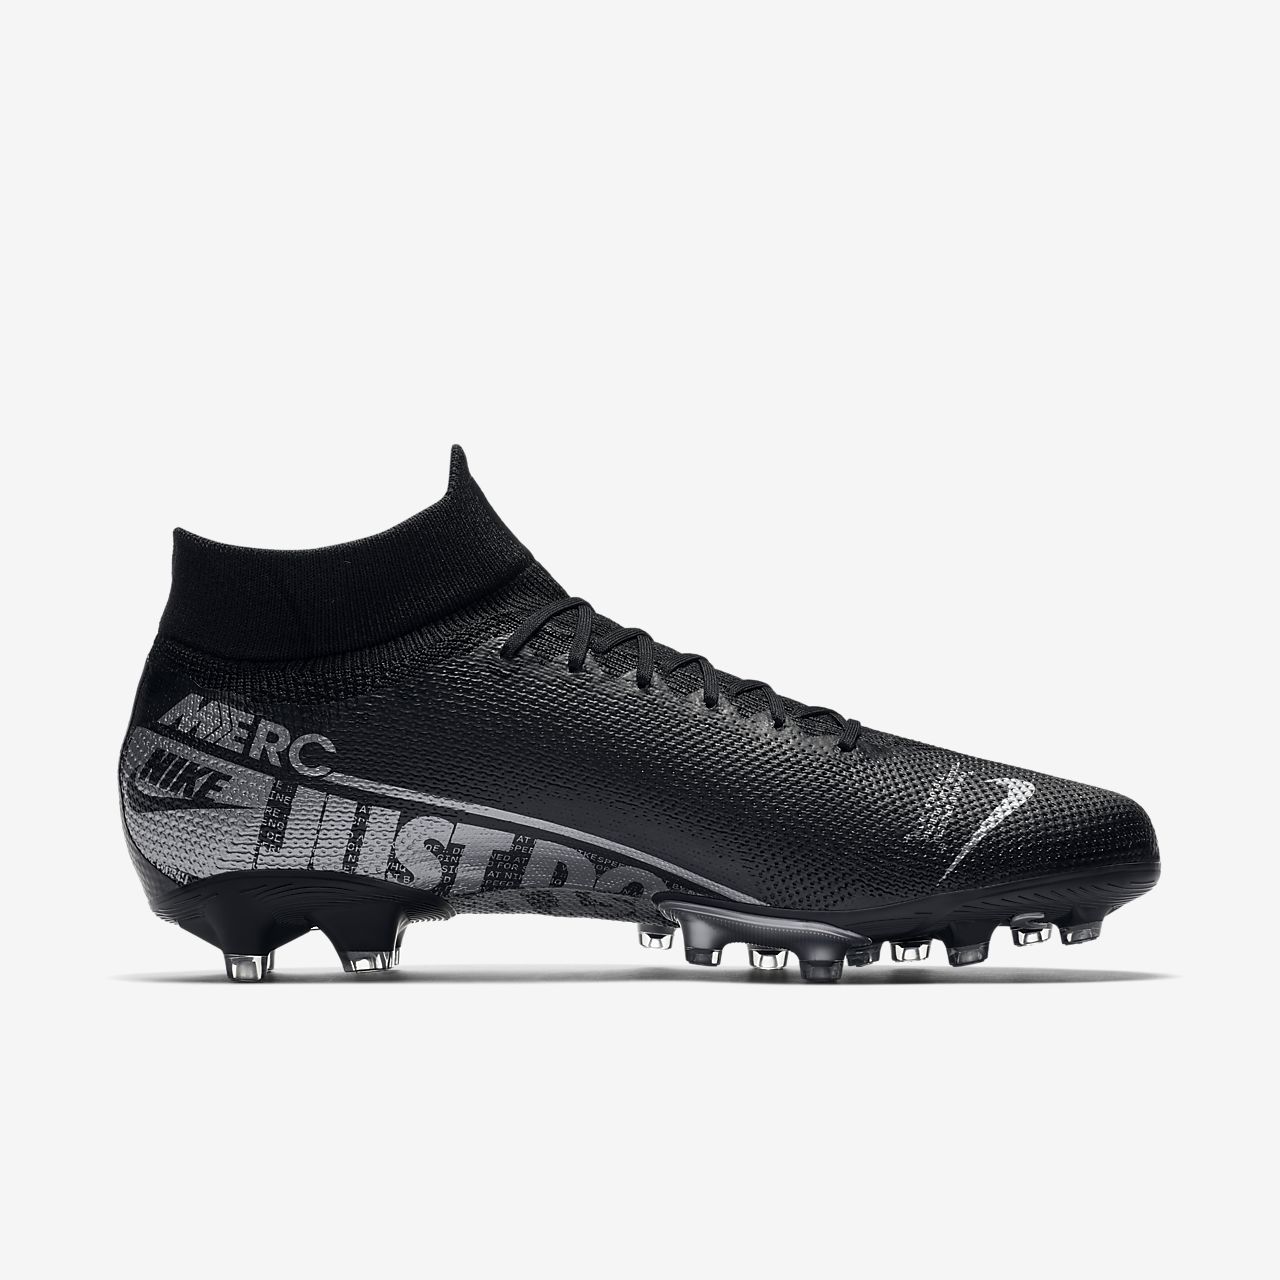 Nike Size 10.5 Mercurial Superfly 6 Pro FG Soccer Cleat Black.